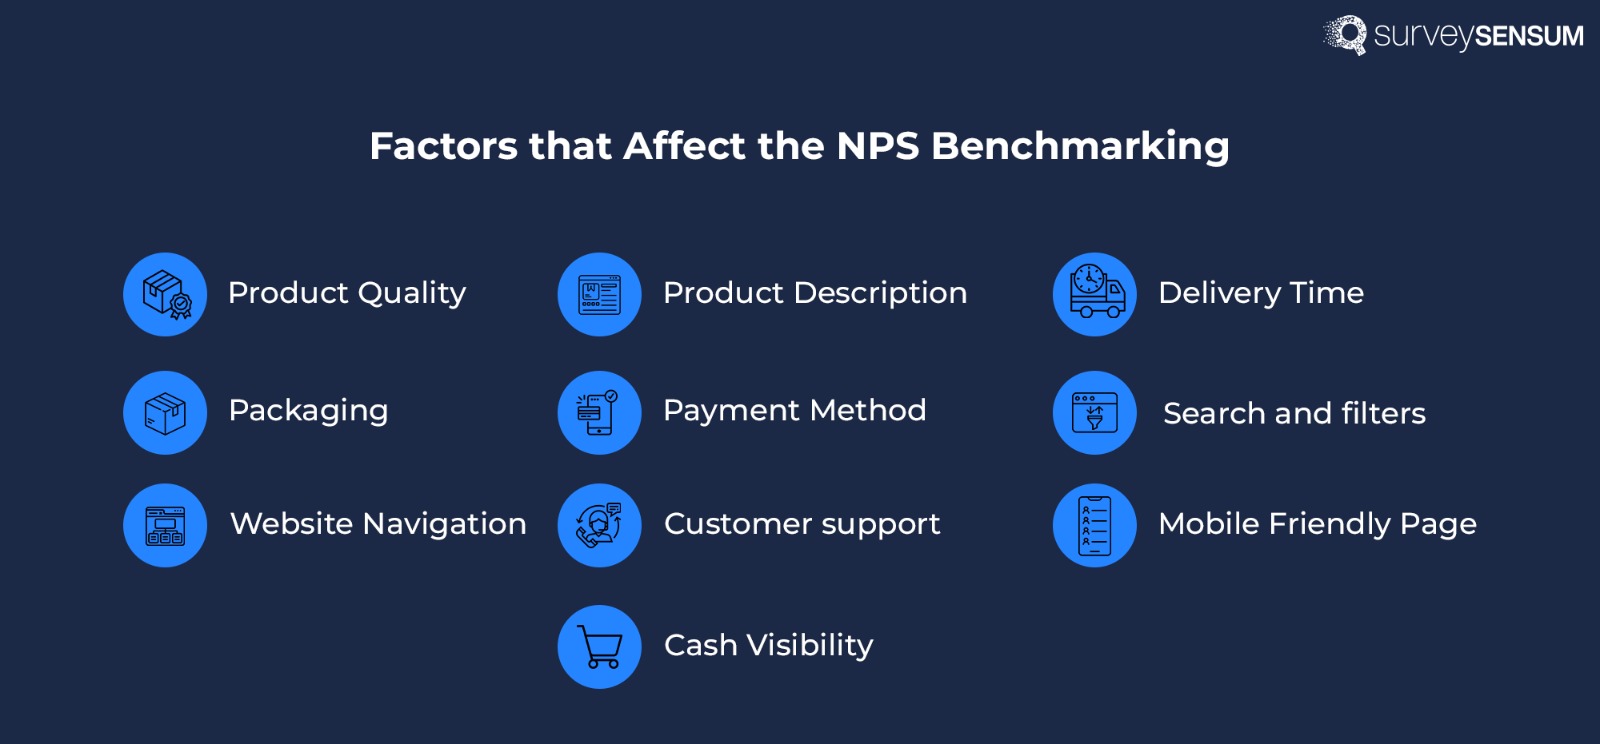  The image shows all the factors affecting NPS benchmarking like market size, customer expectations, and competitive forces. 